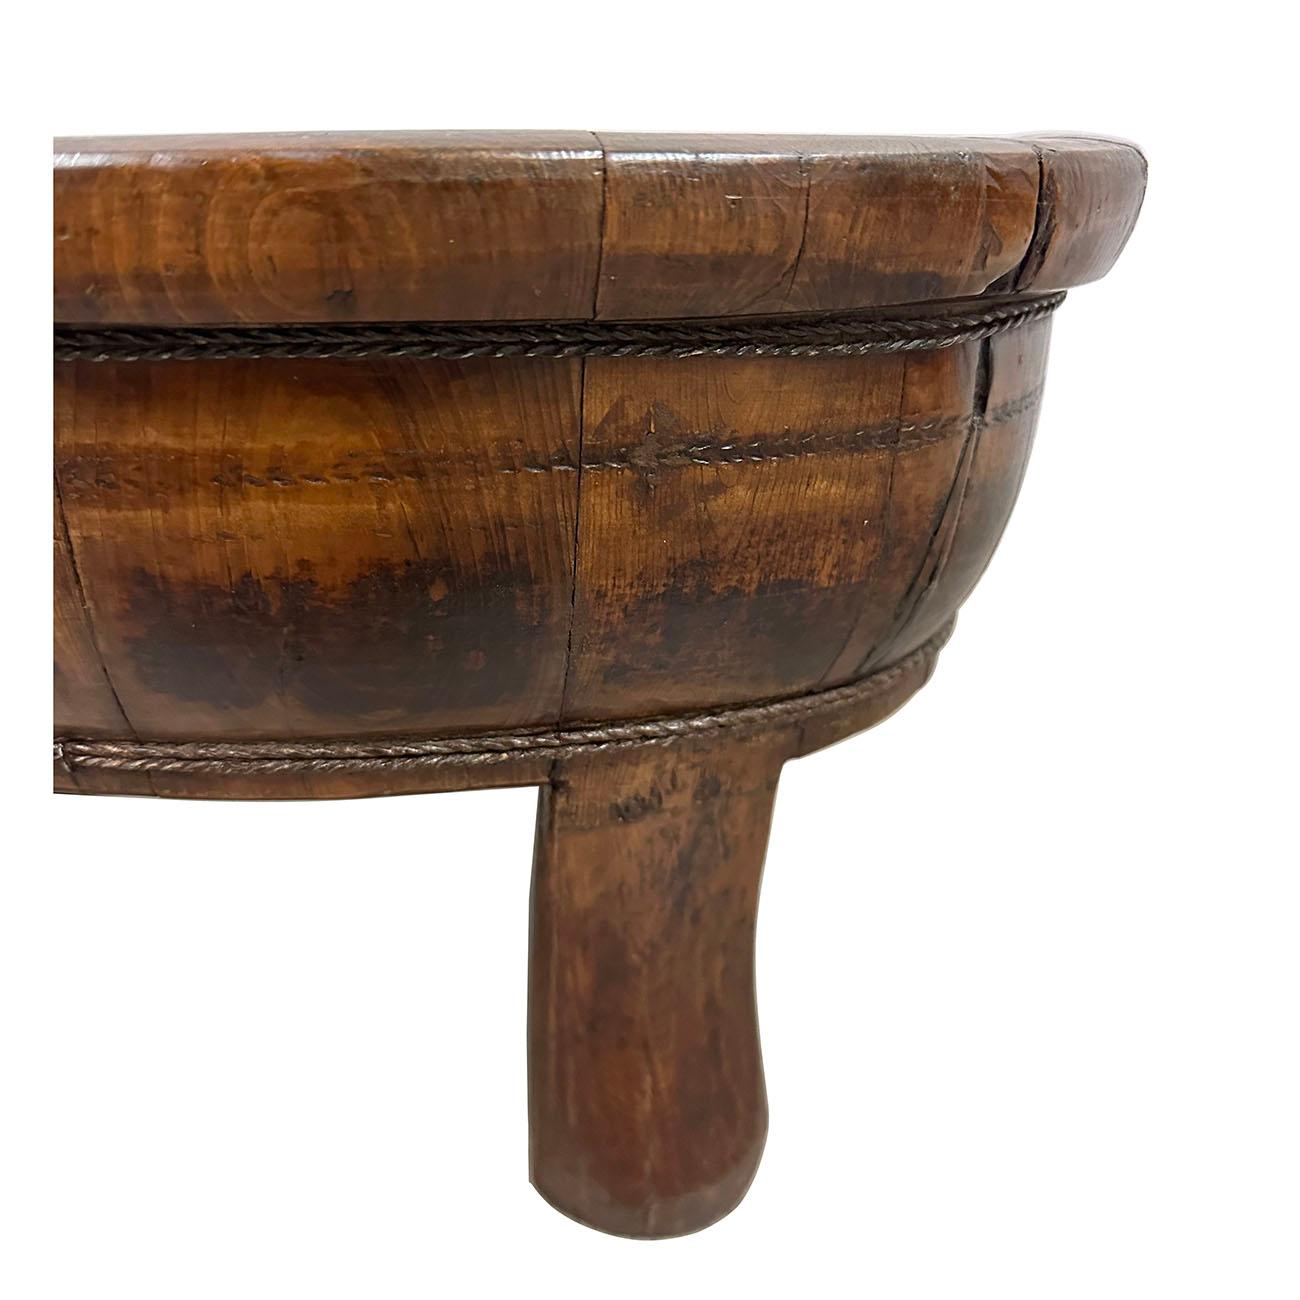 Late 19th Century Chinese Hand Made Wooden Wash/Laundry Basin In Good Condition For Sale In Pomona, CA